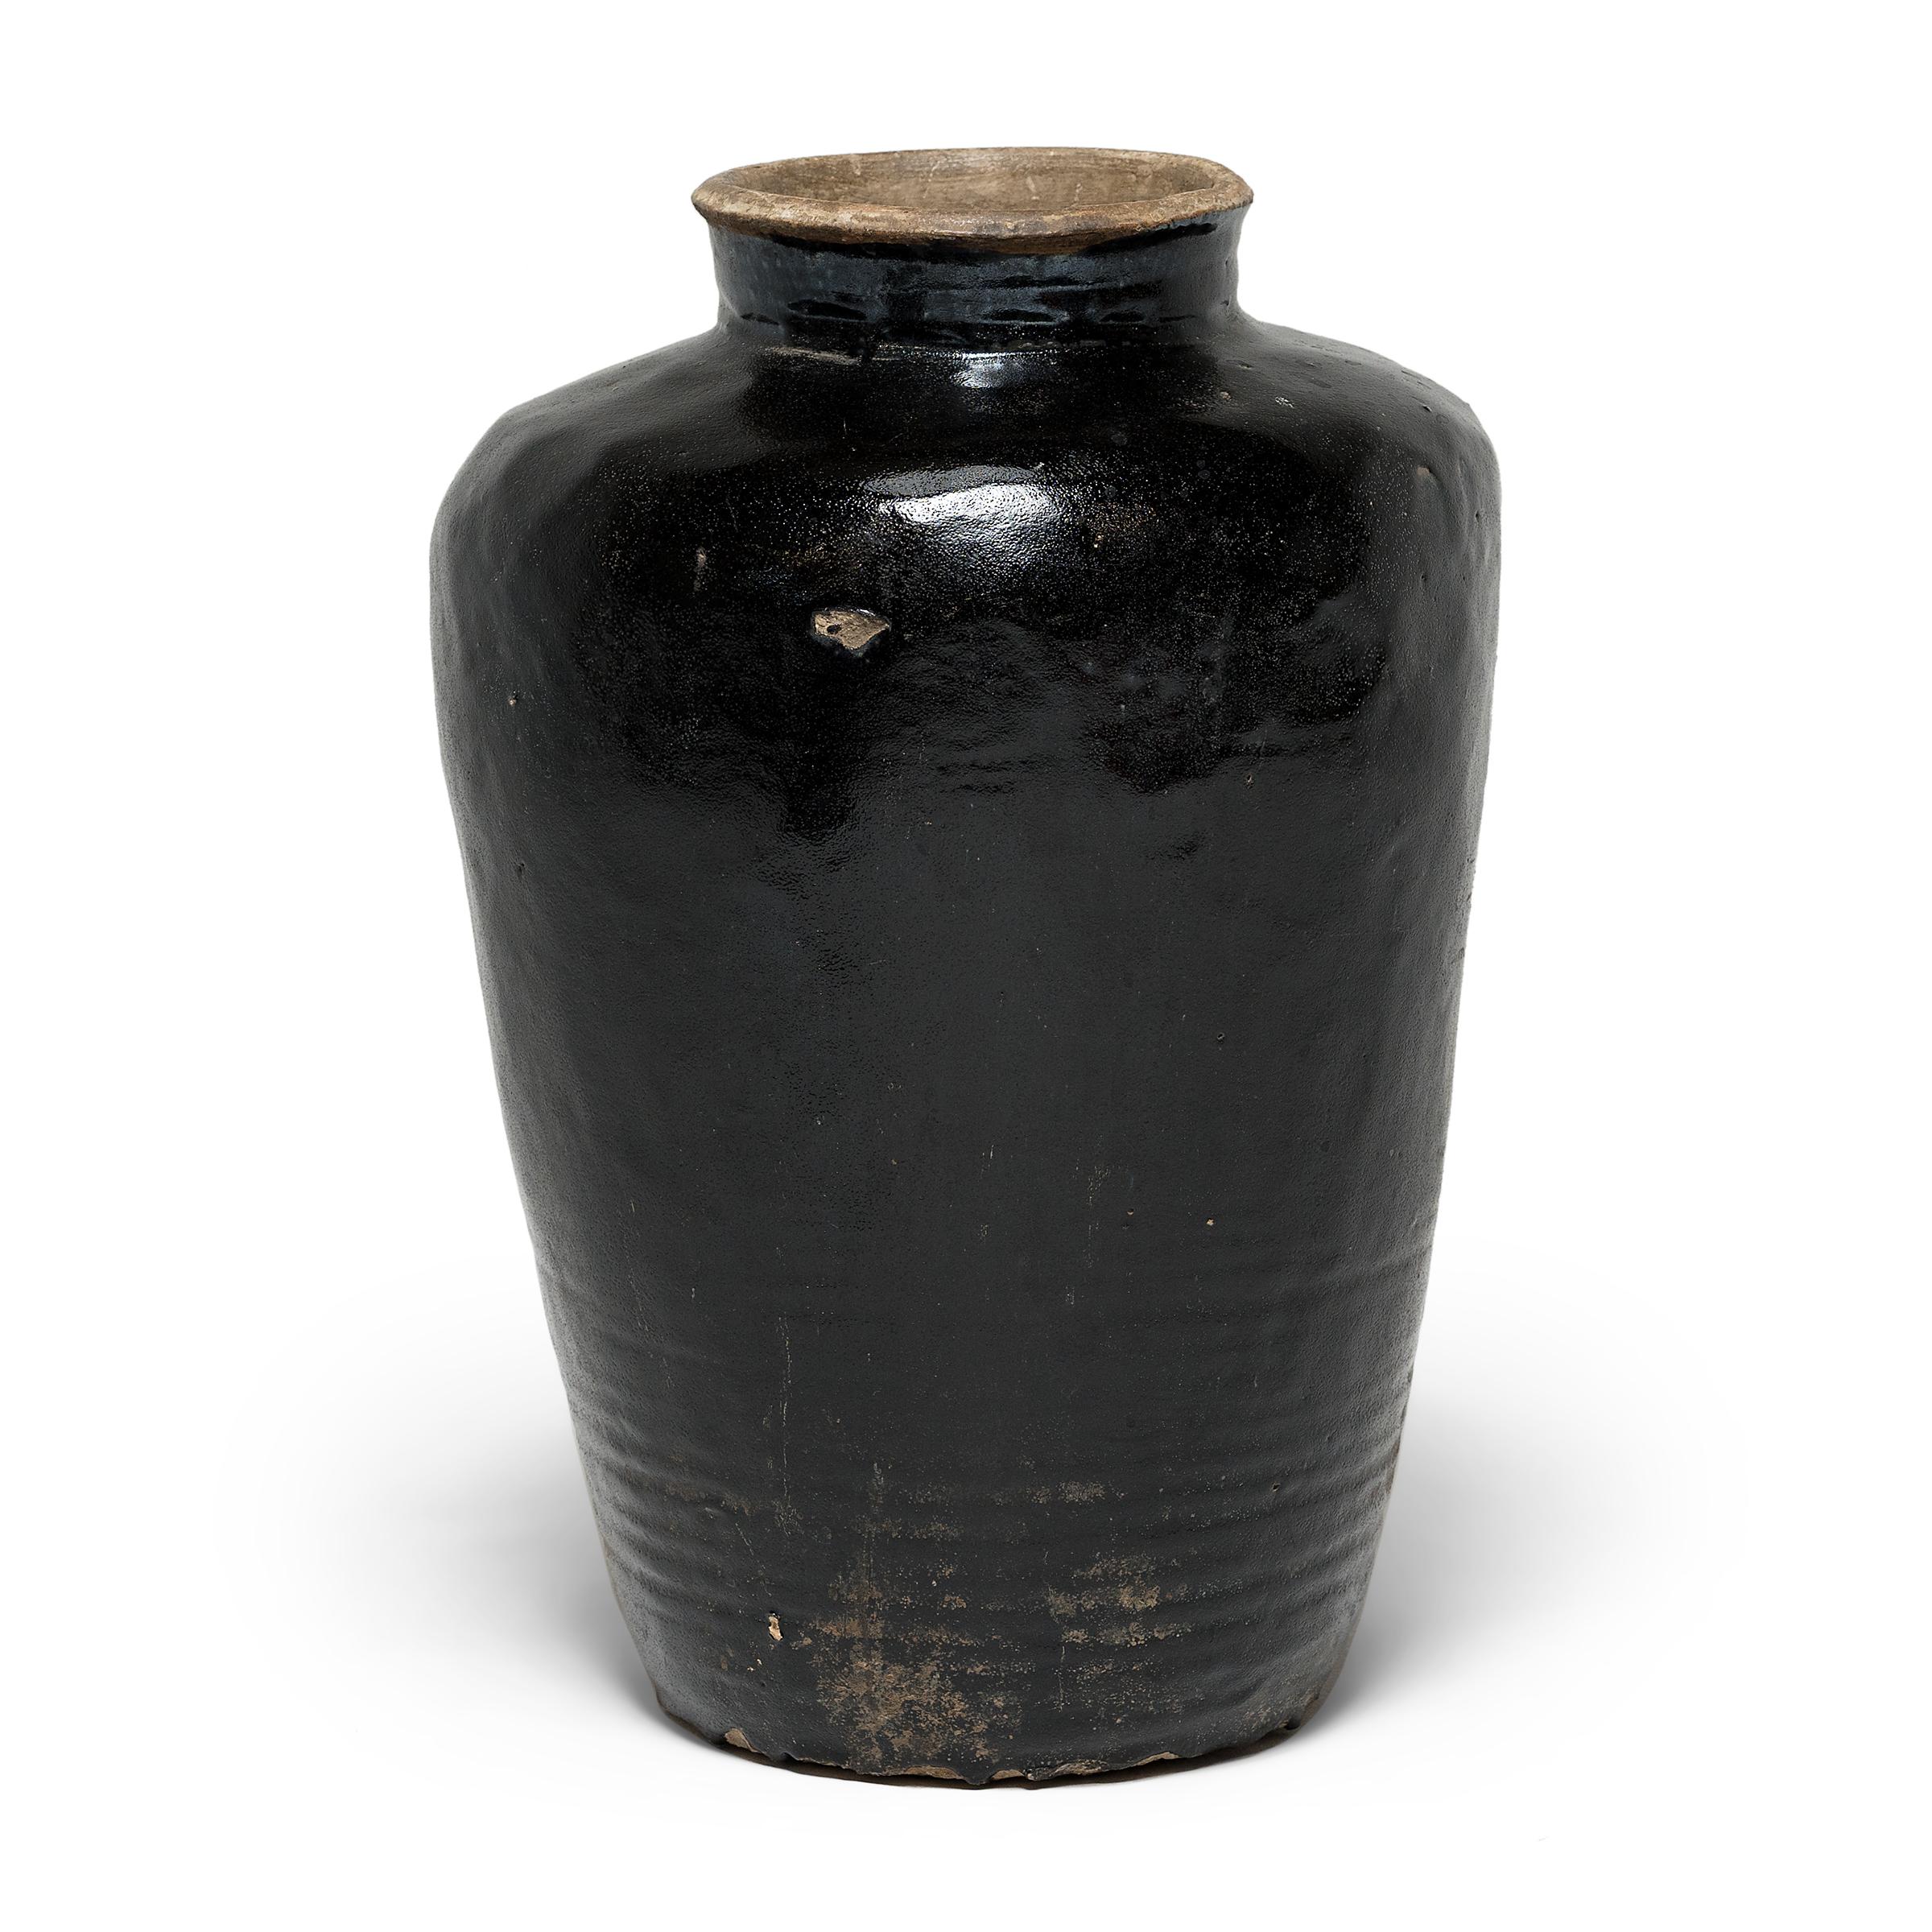 This large stoneware vessel is a Qing-dynasty wine jar, used to store wine and spirits made from rice and other grains. The large vessel would have been sculpted by hand, and bears traces of the maker’s hand in its irregular surface. The subtle